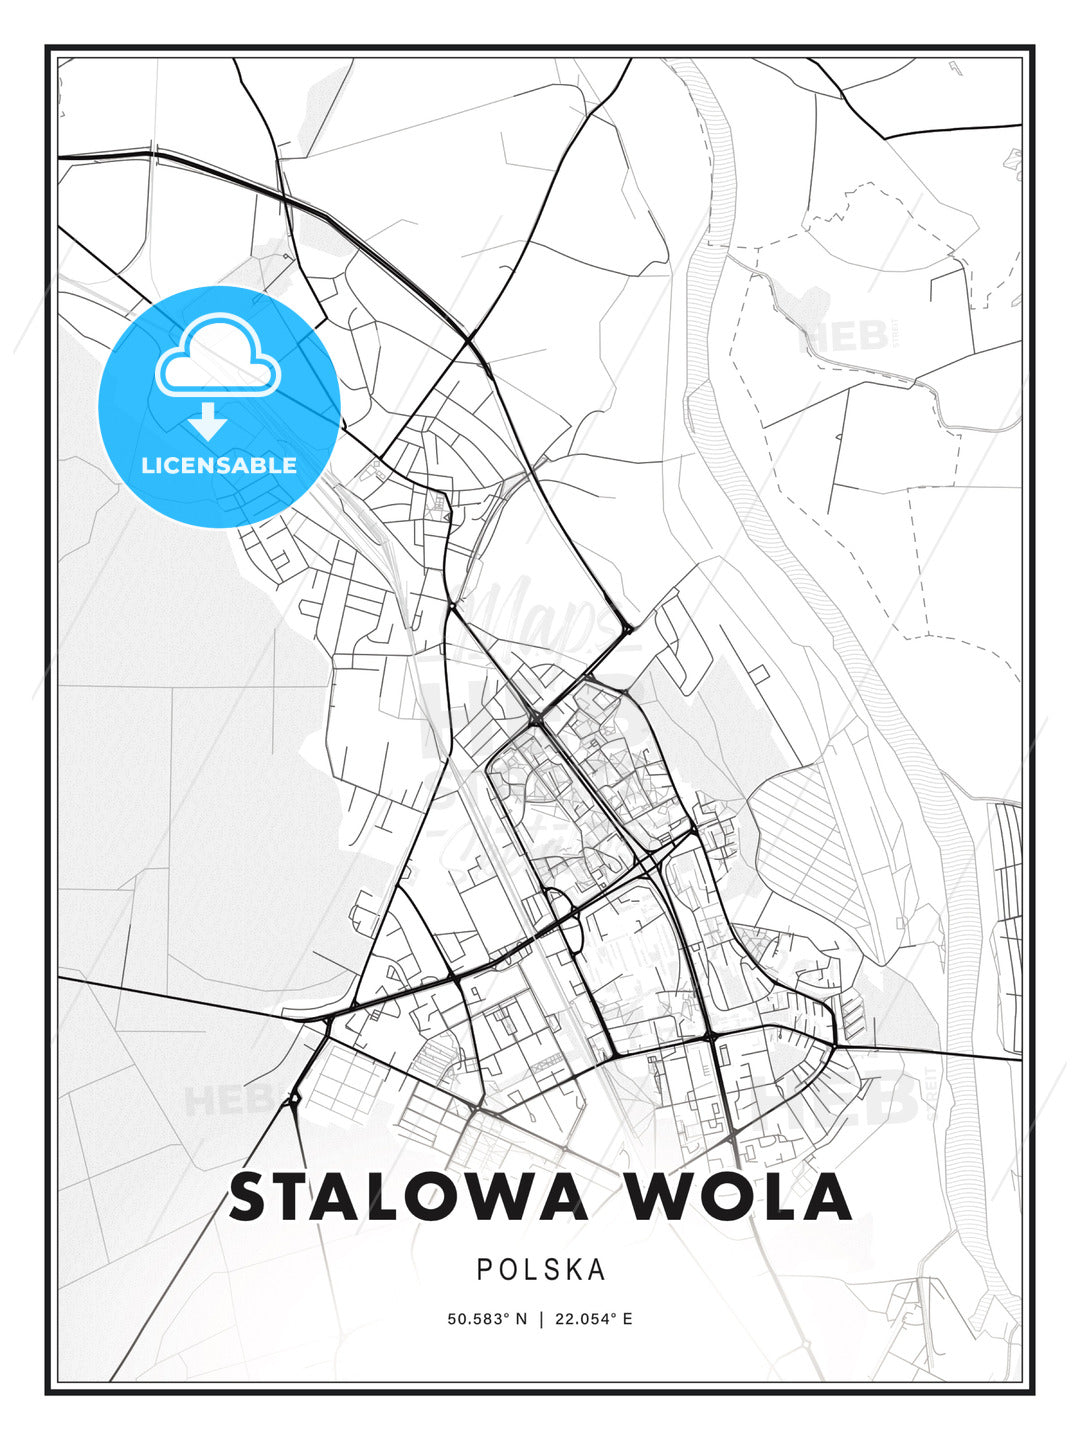 Stalowa Wola, Poland, Modern Print Template in Various Formats - HEBSTREITS Sketches